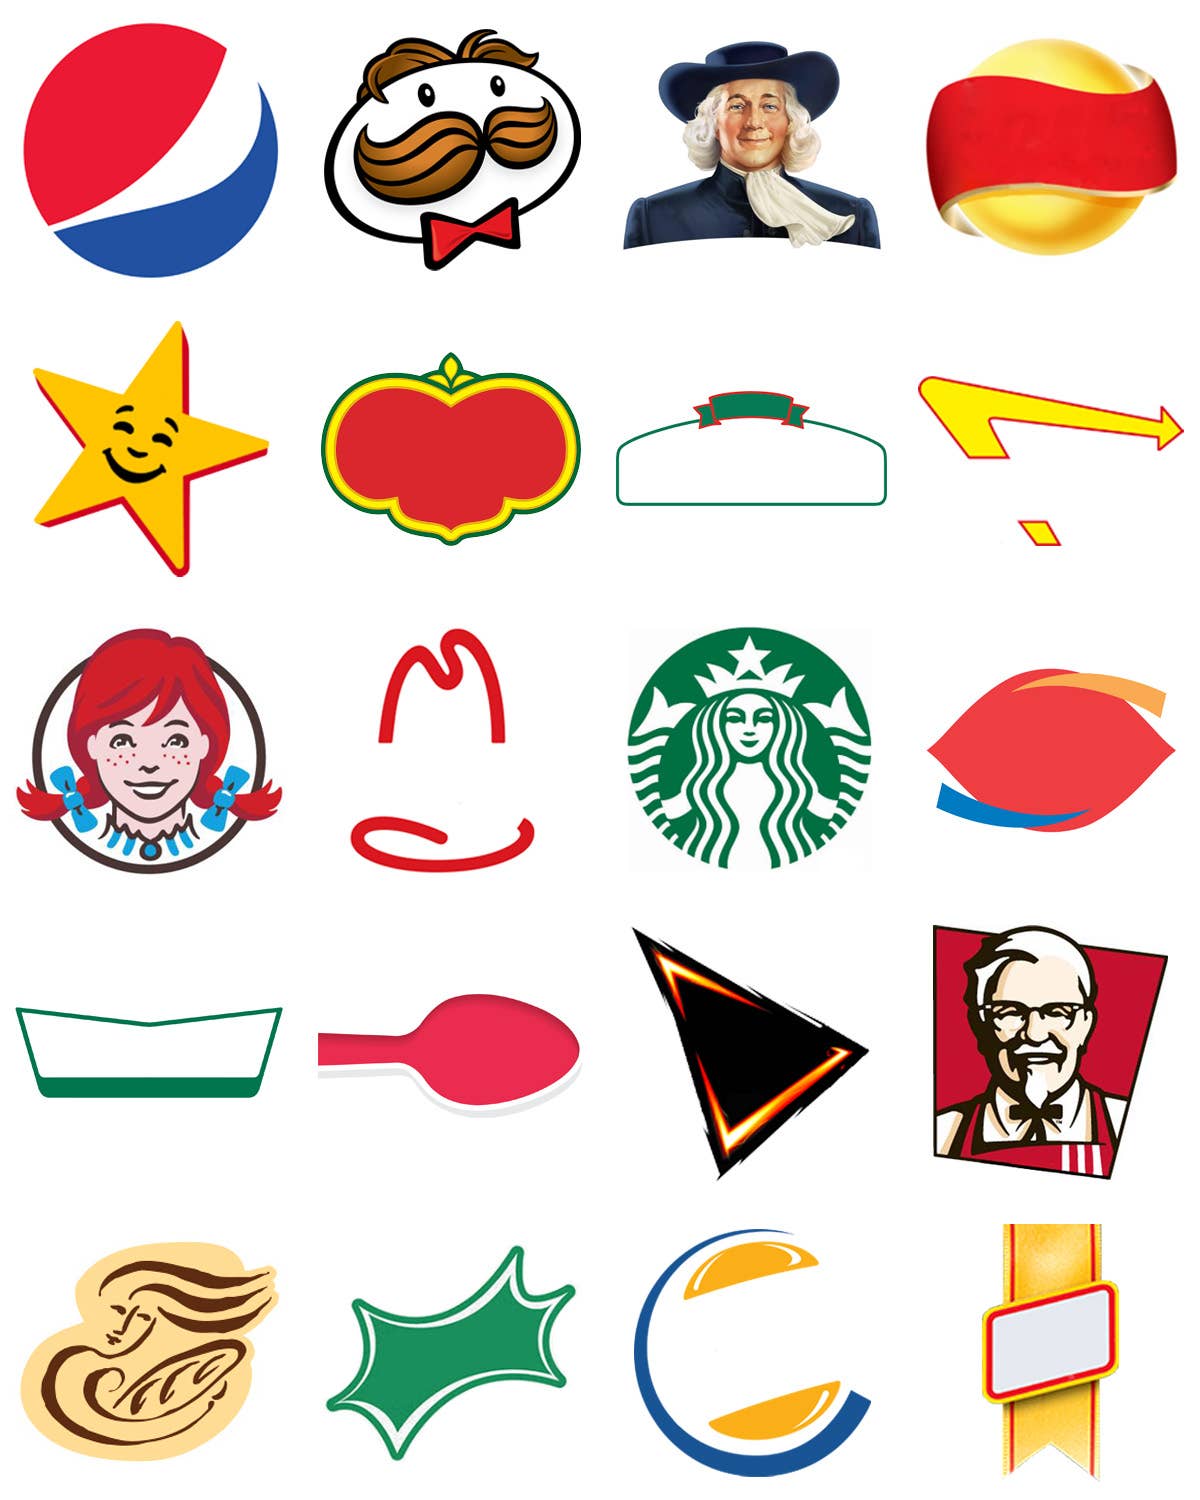 How Many Food Logos Can You Identify?